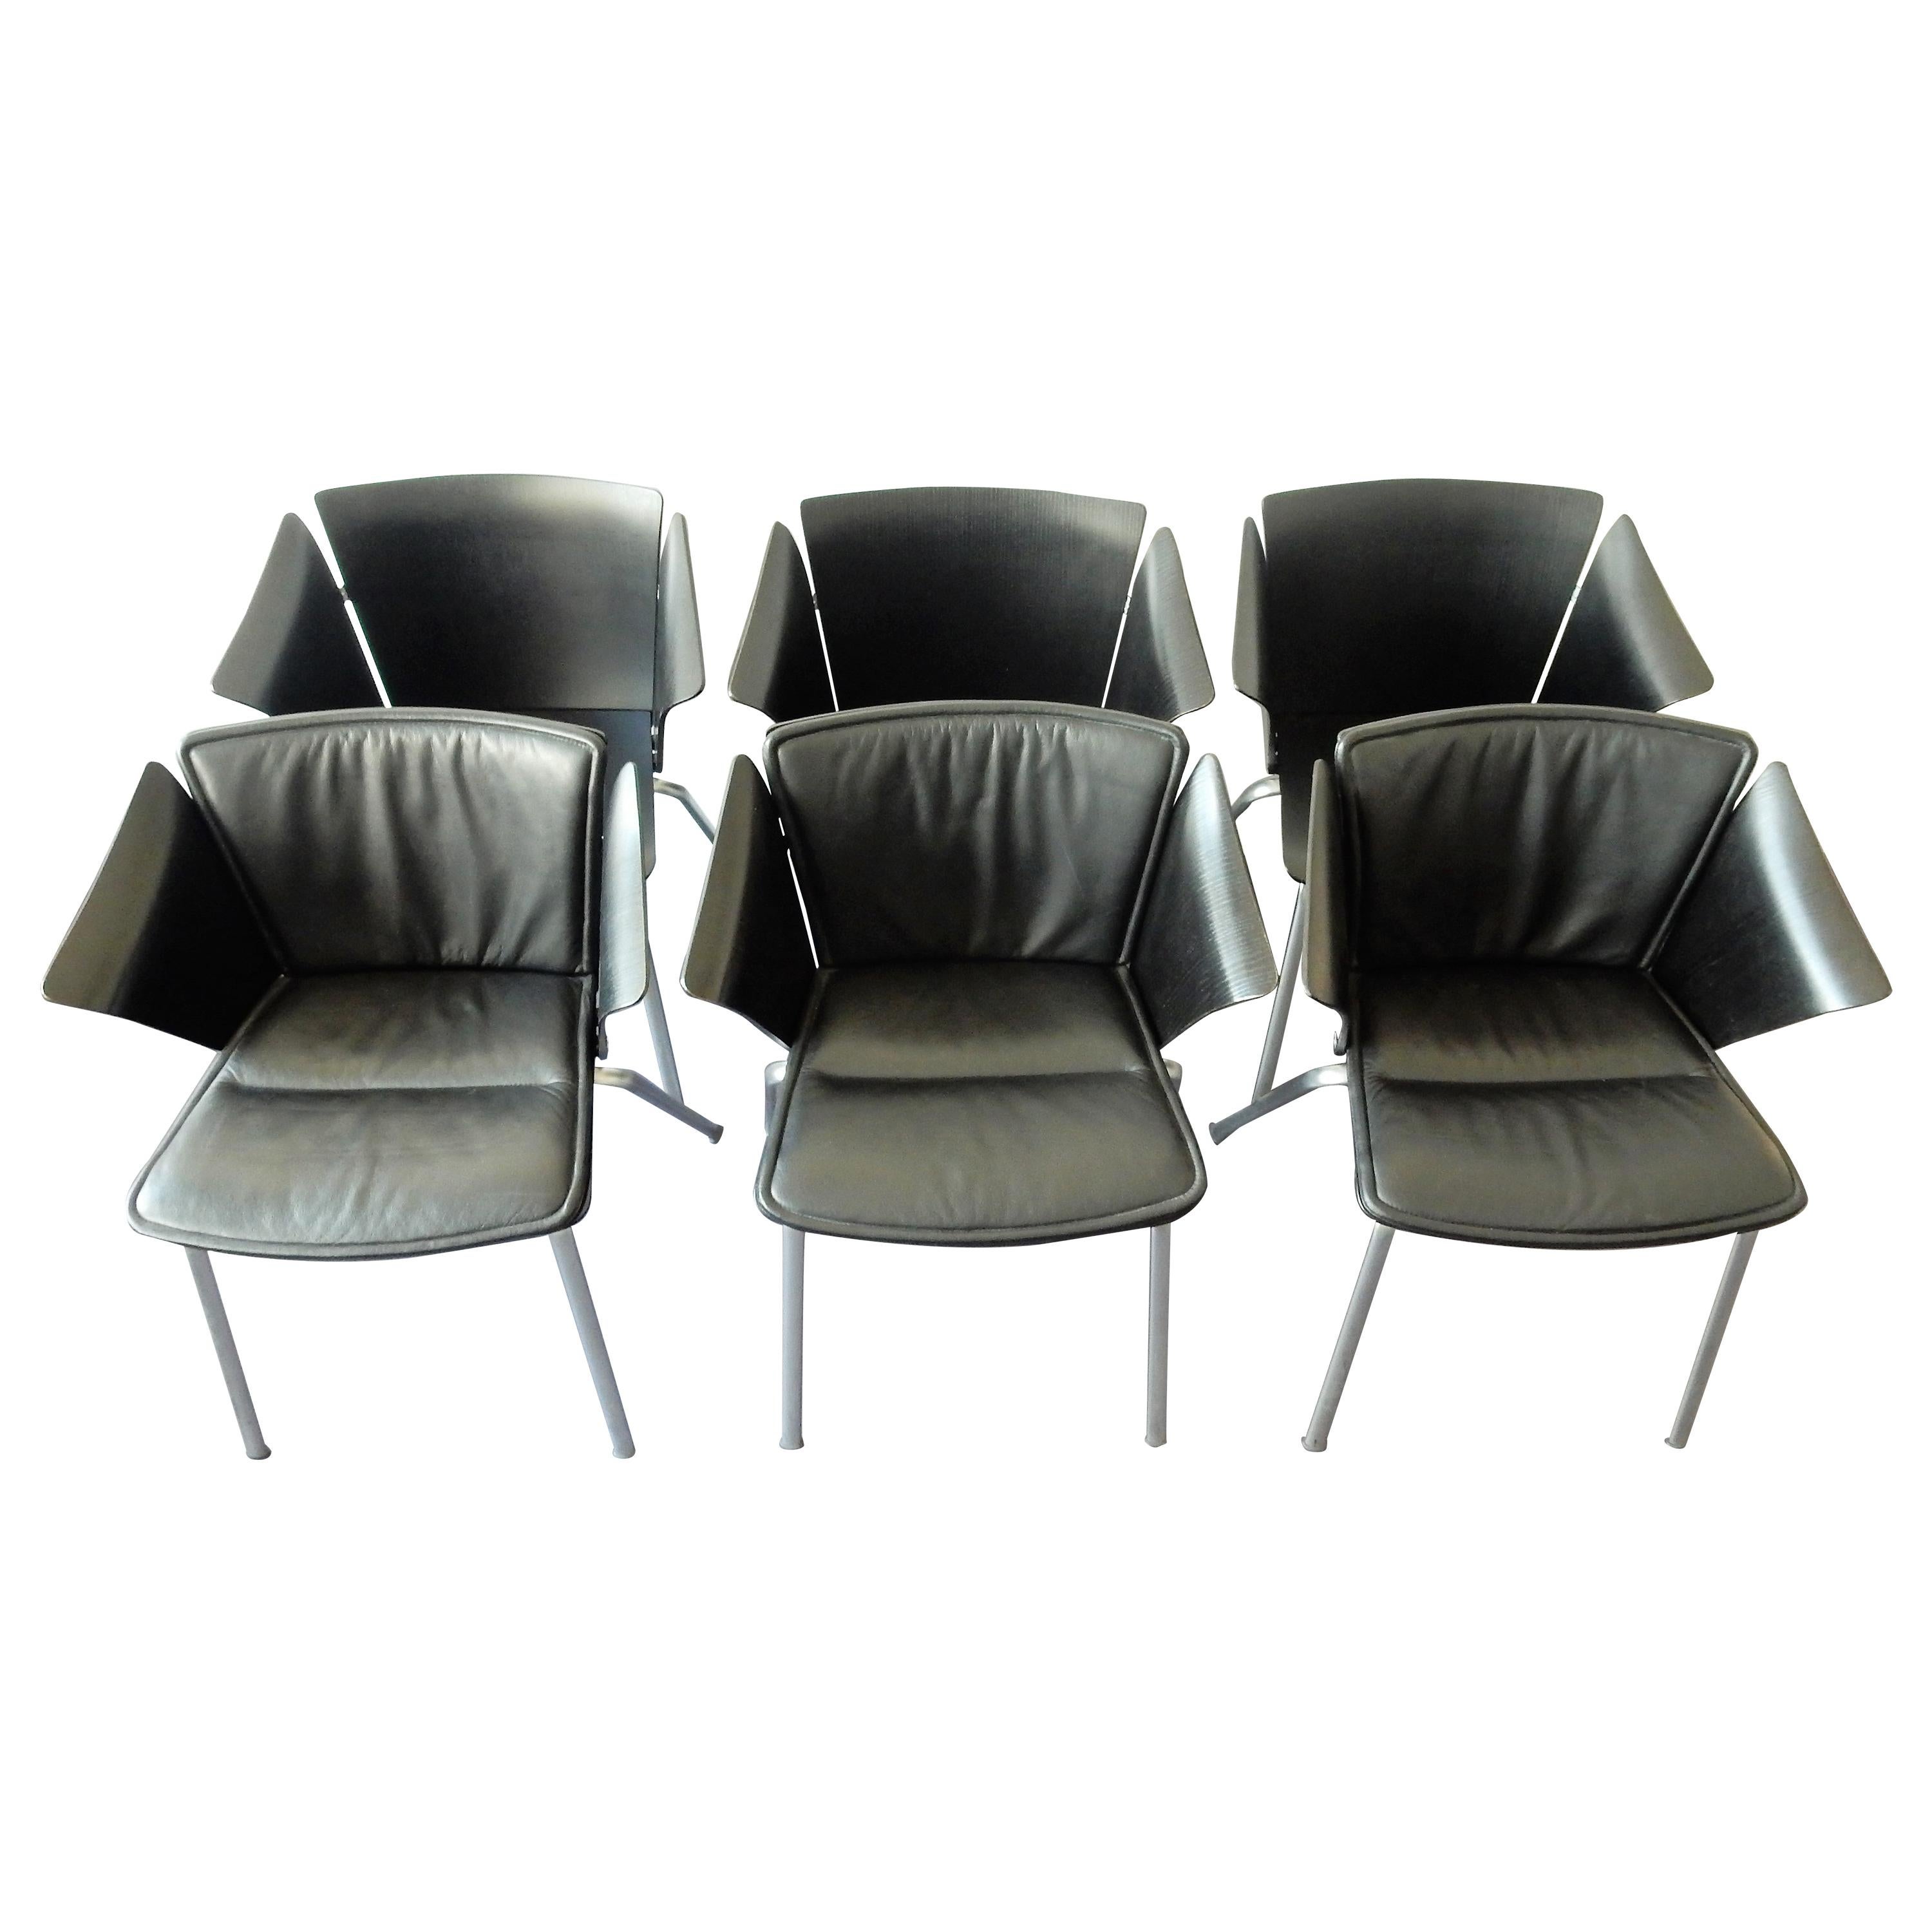 Set of 6 model 'VM3' Vico armchairs by Vico Magistretti for Fritz Hansen, 1990s